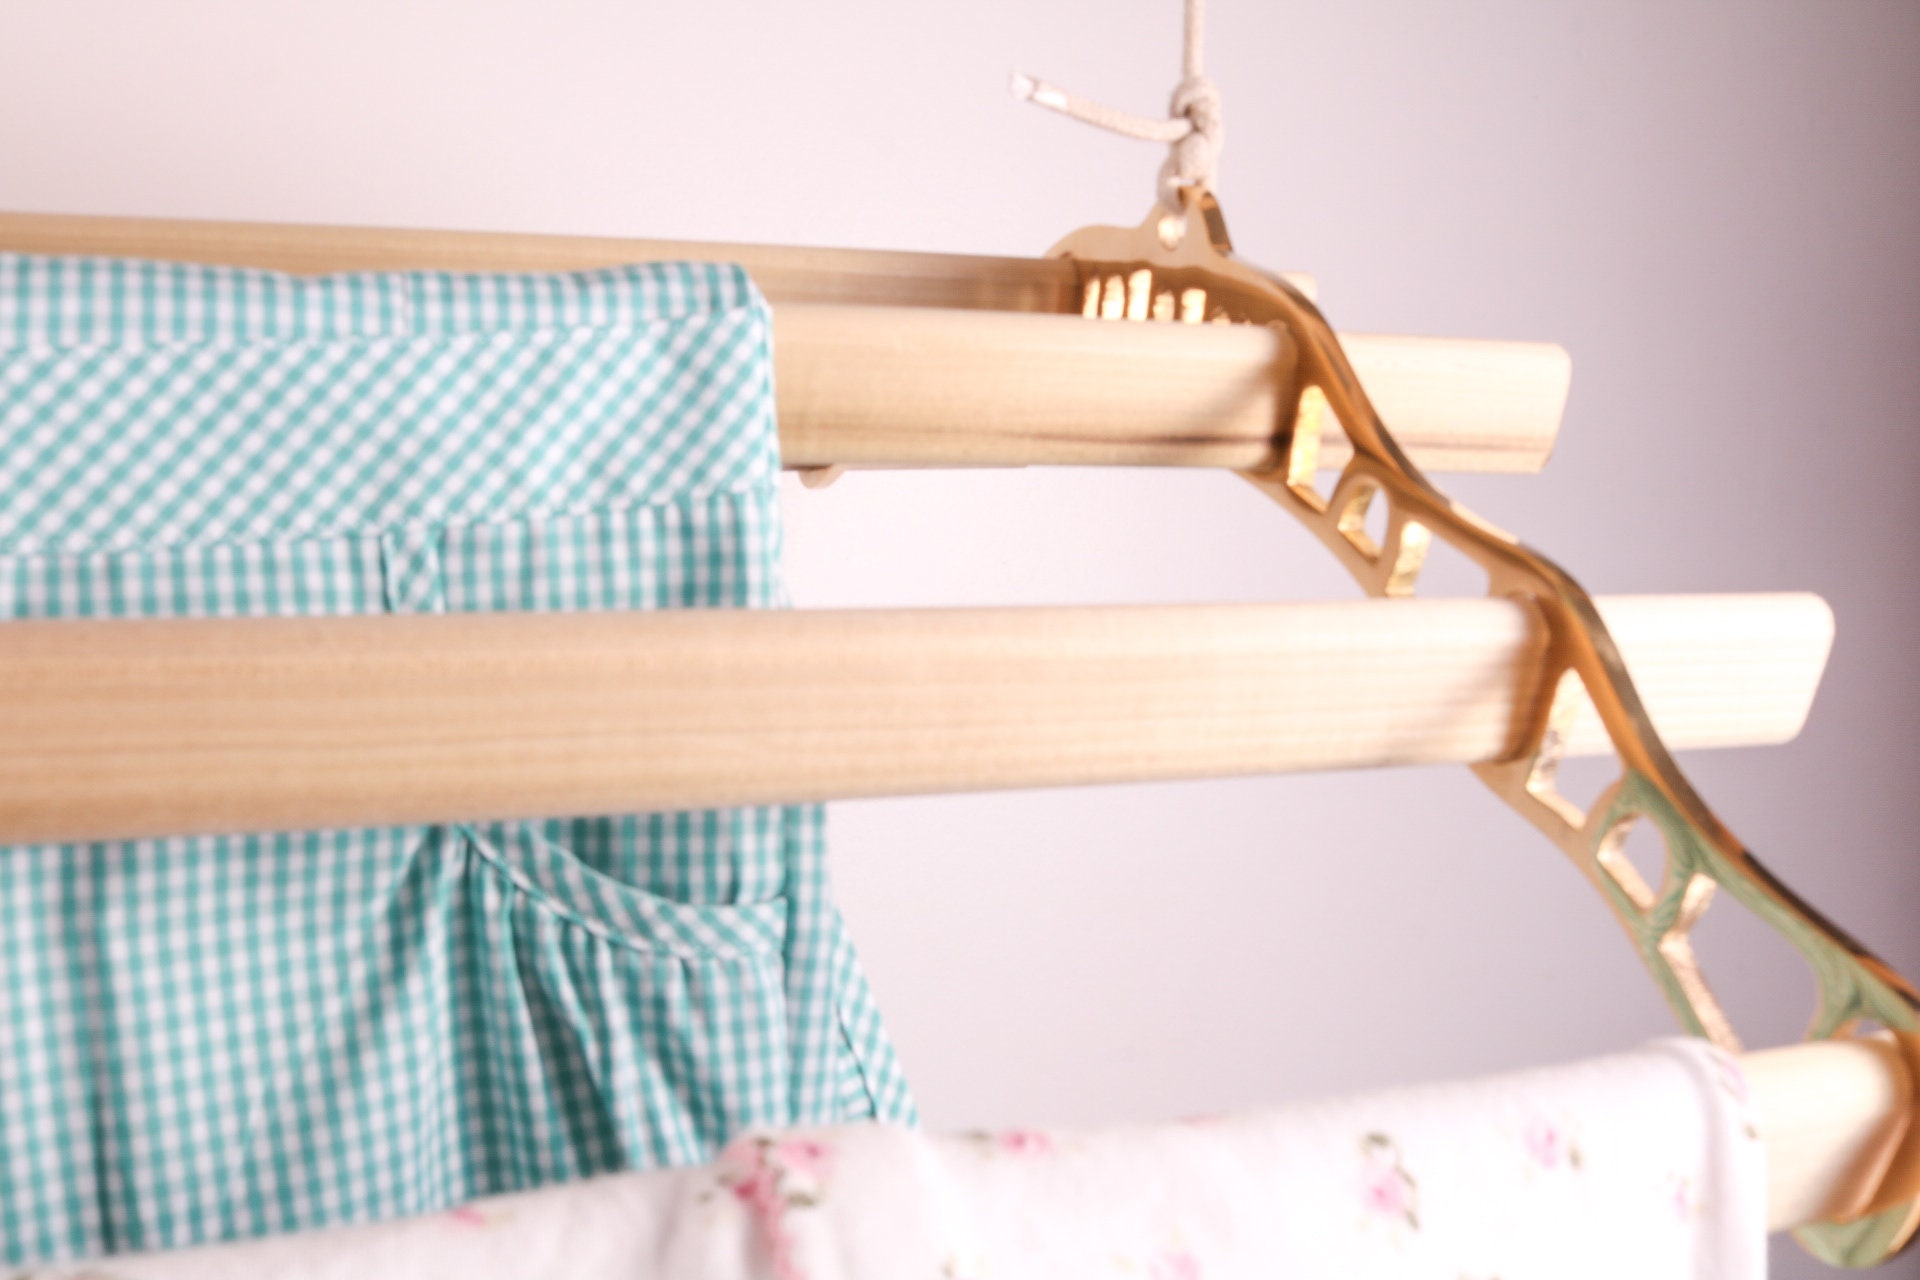 Hanging Drying Rack, Laundry Pulley Maid